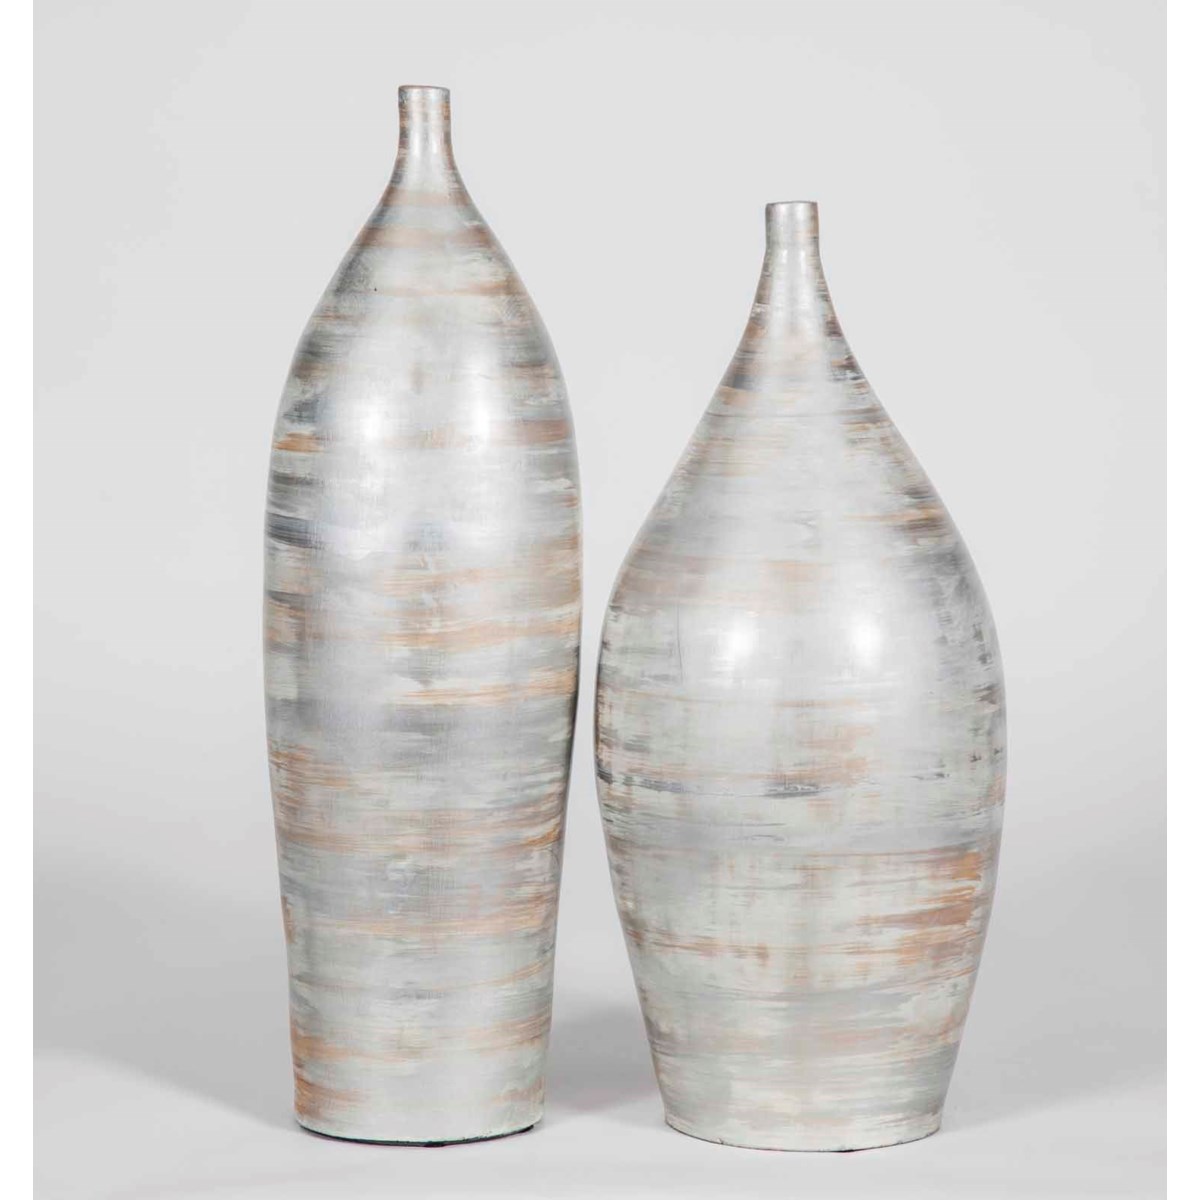 Large Vase in Looking Glass Finish